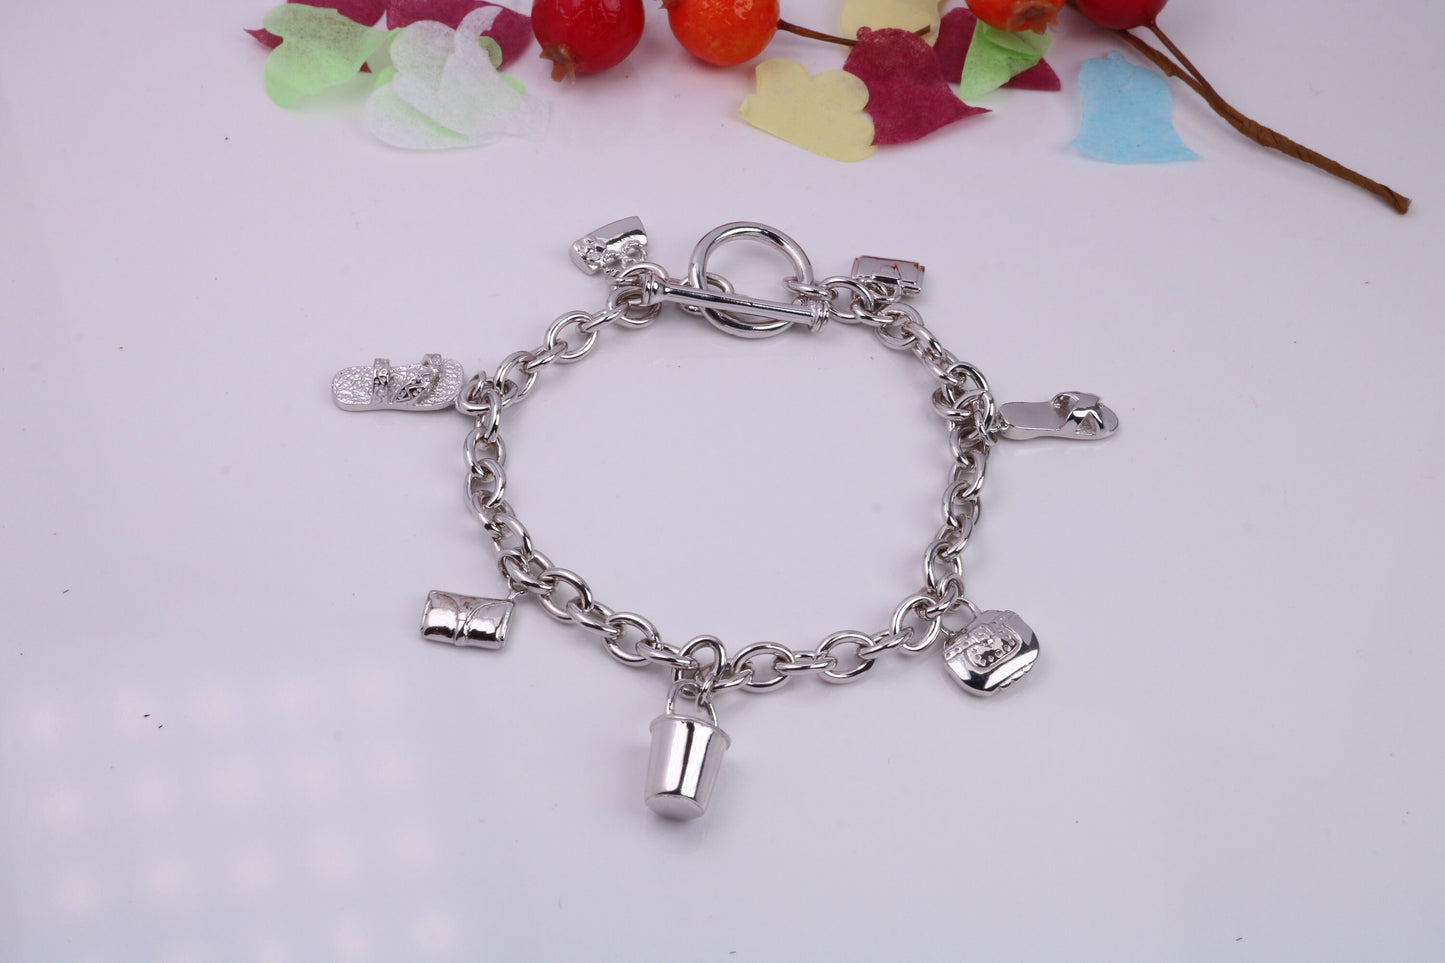 Ready to Wear Charms Bracelet, With Seven C Z set Charms Attached, Made from solid Sterling Silver, 7.50 Inches Long, Good Weighty Feel